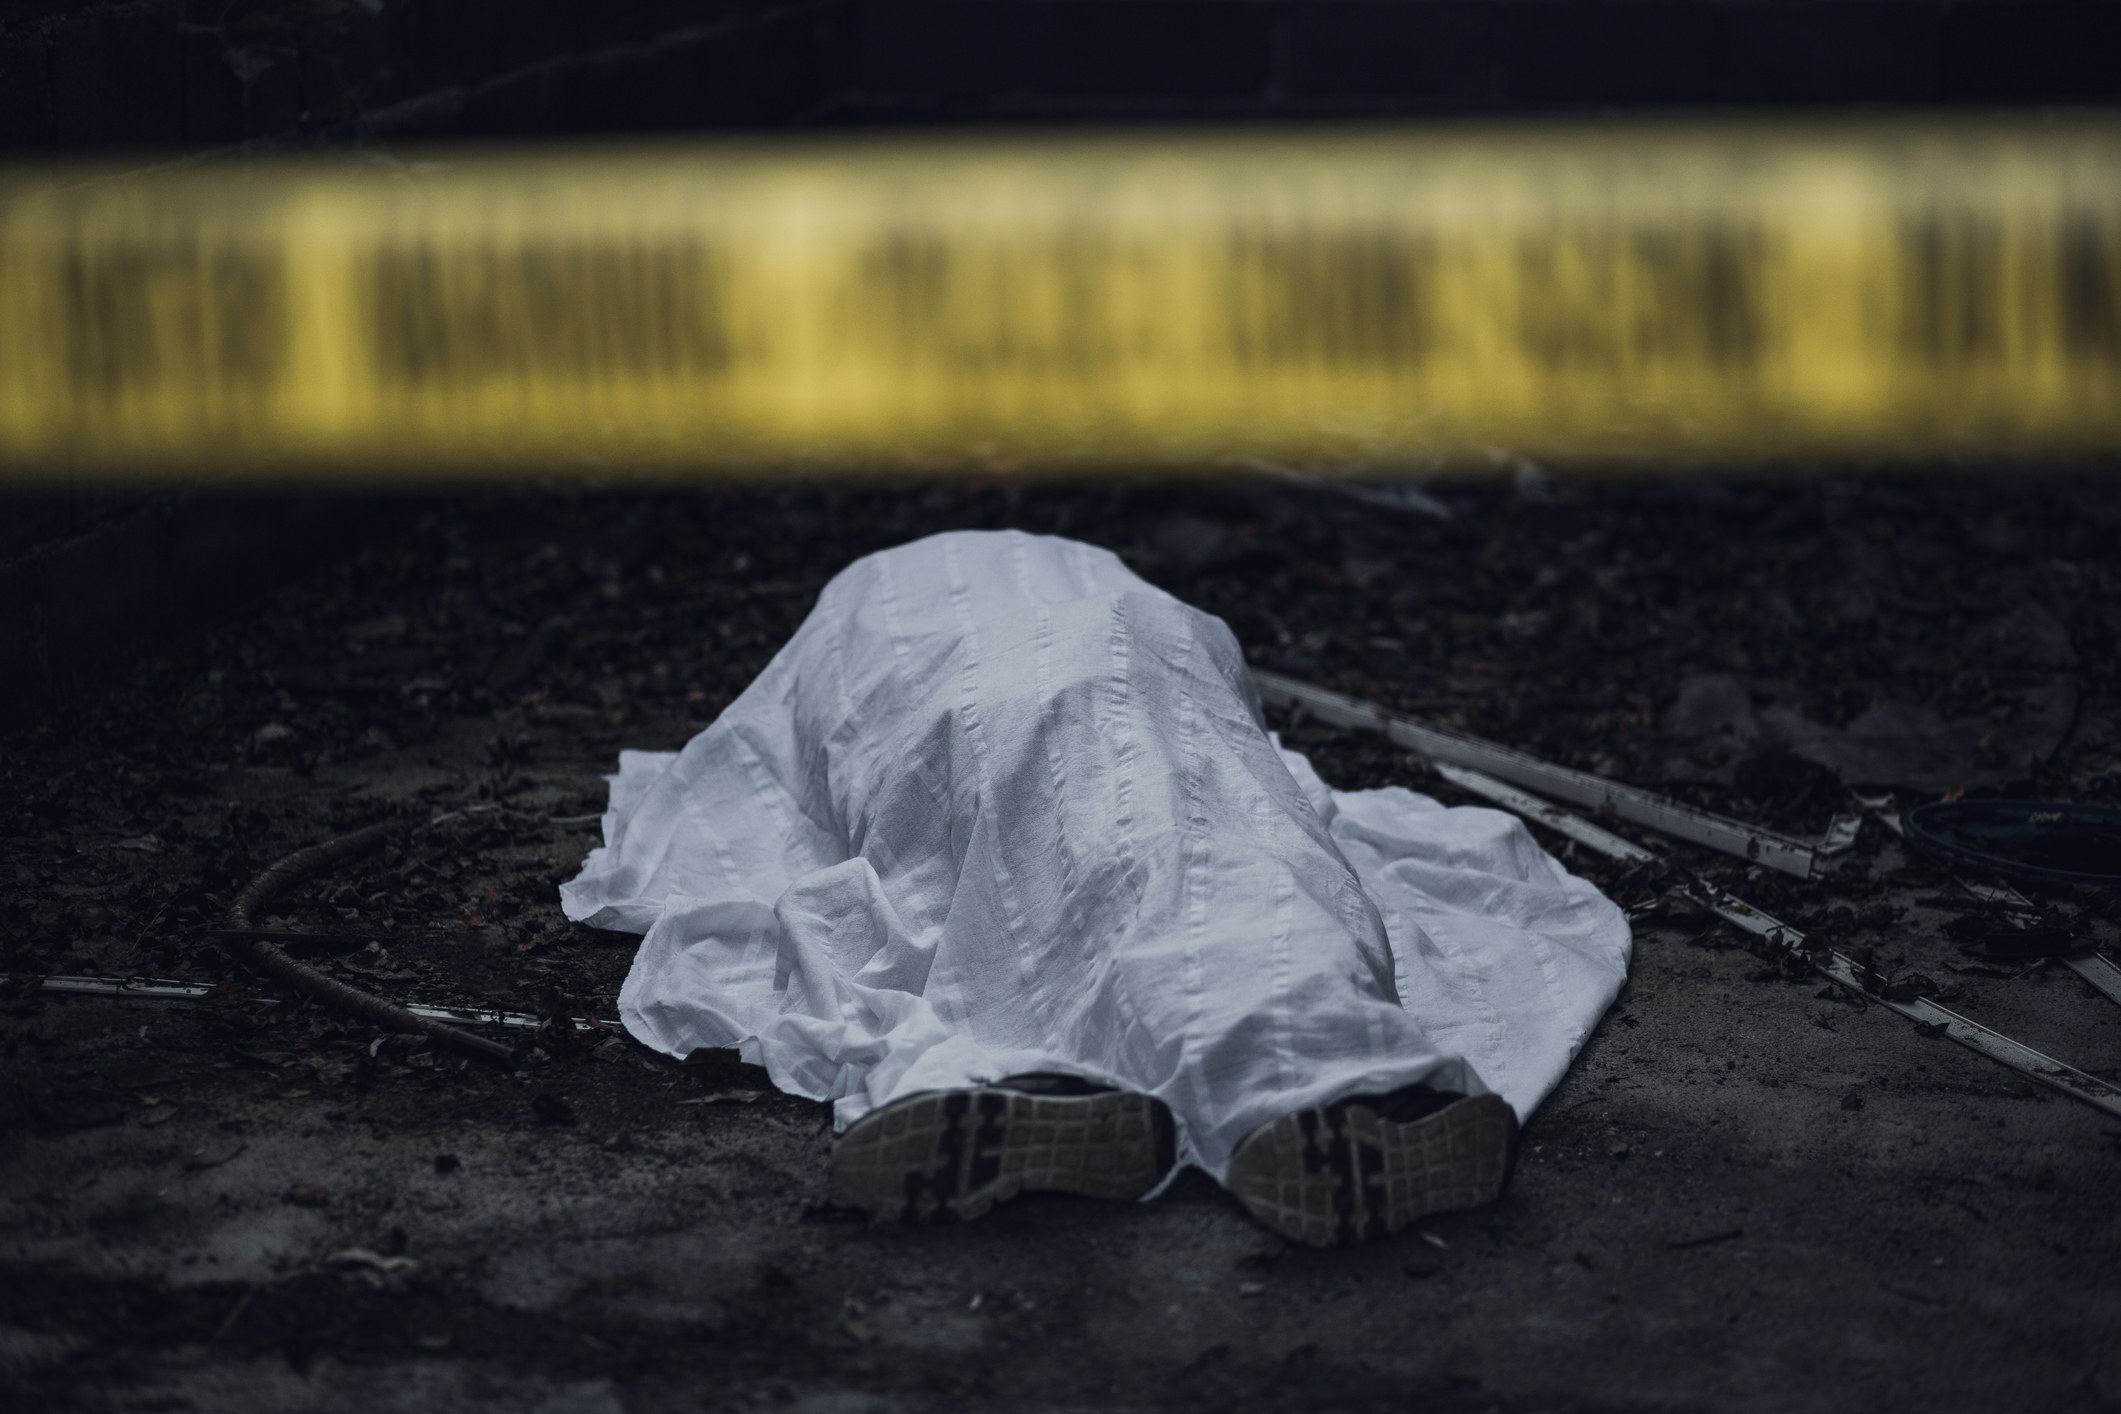 A covered dead body behind crime scene tape